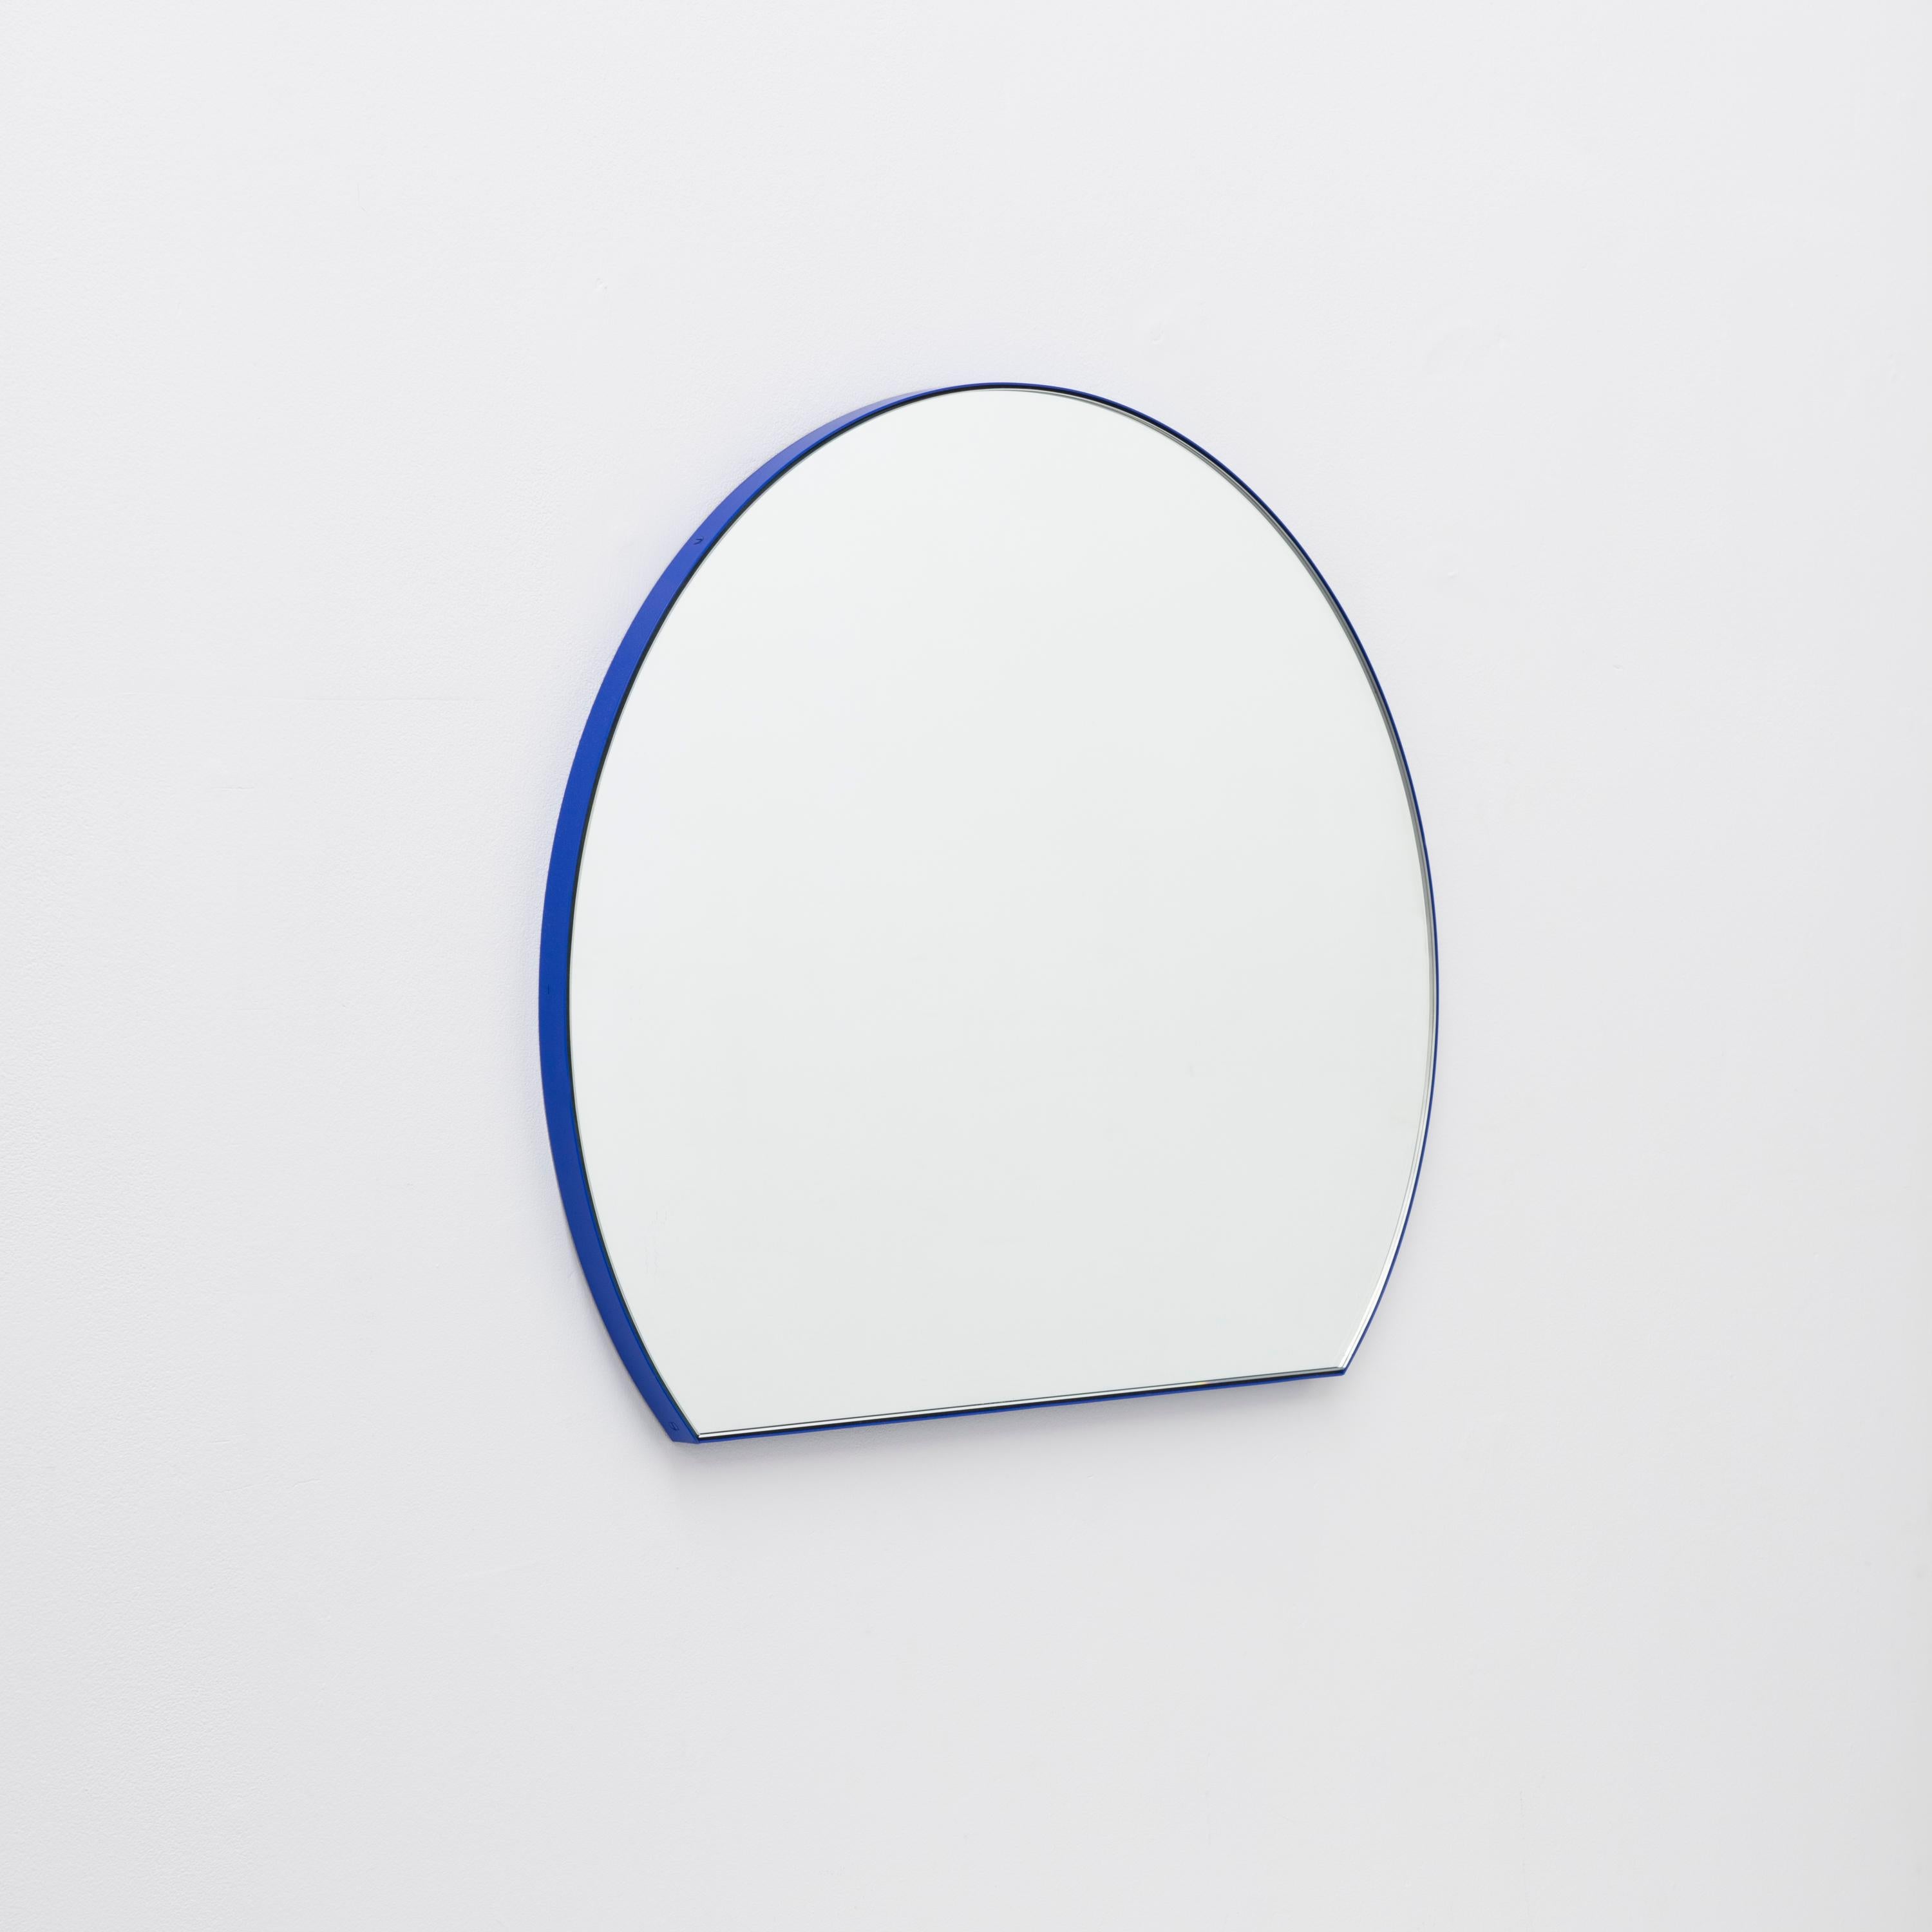 Powder-Coated Orbis Trecus Cropped Round Modern Mirror with Blue Frame, Large For Sale